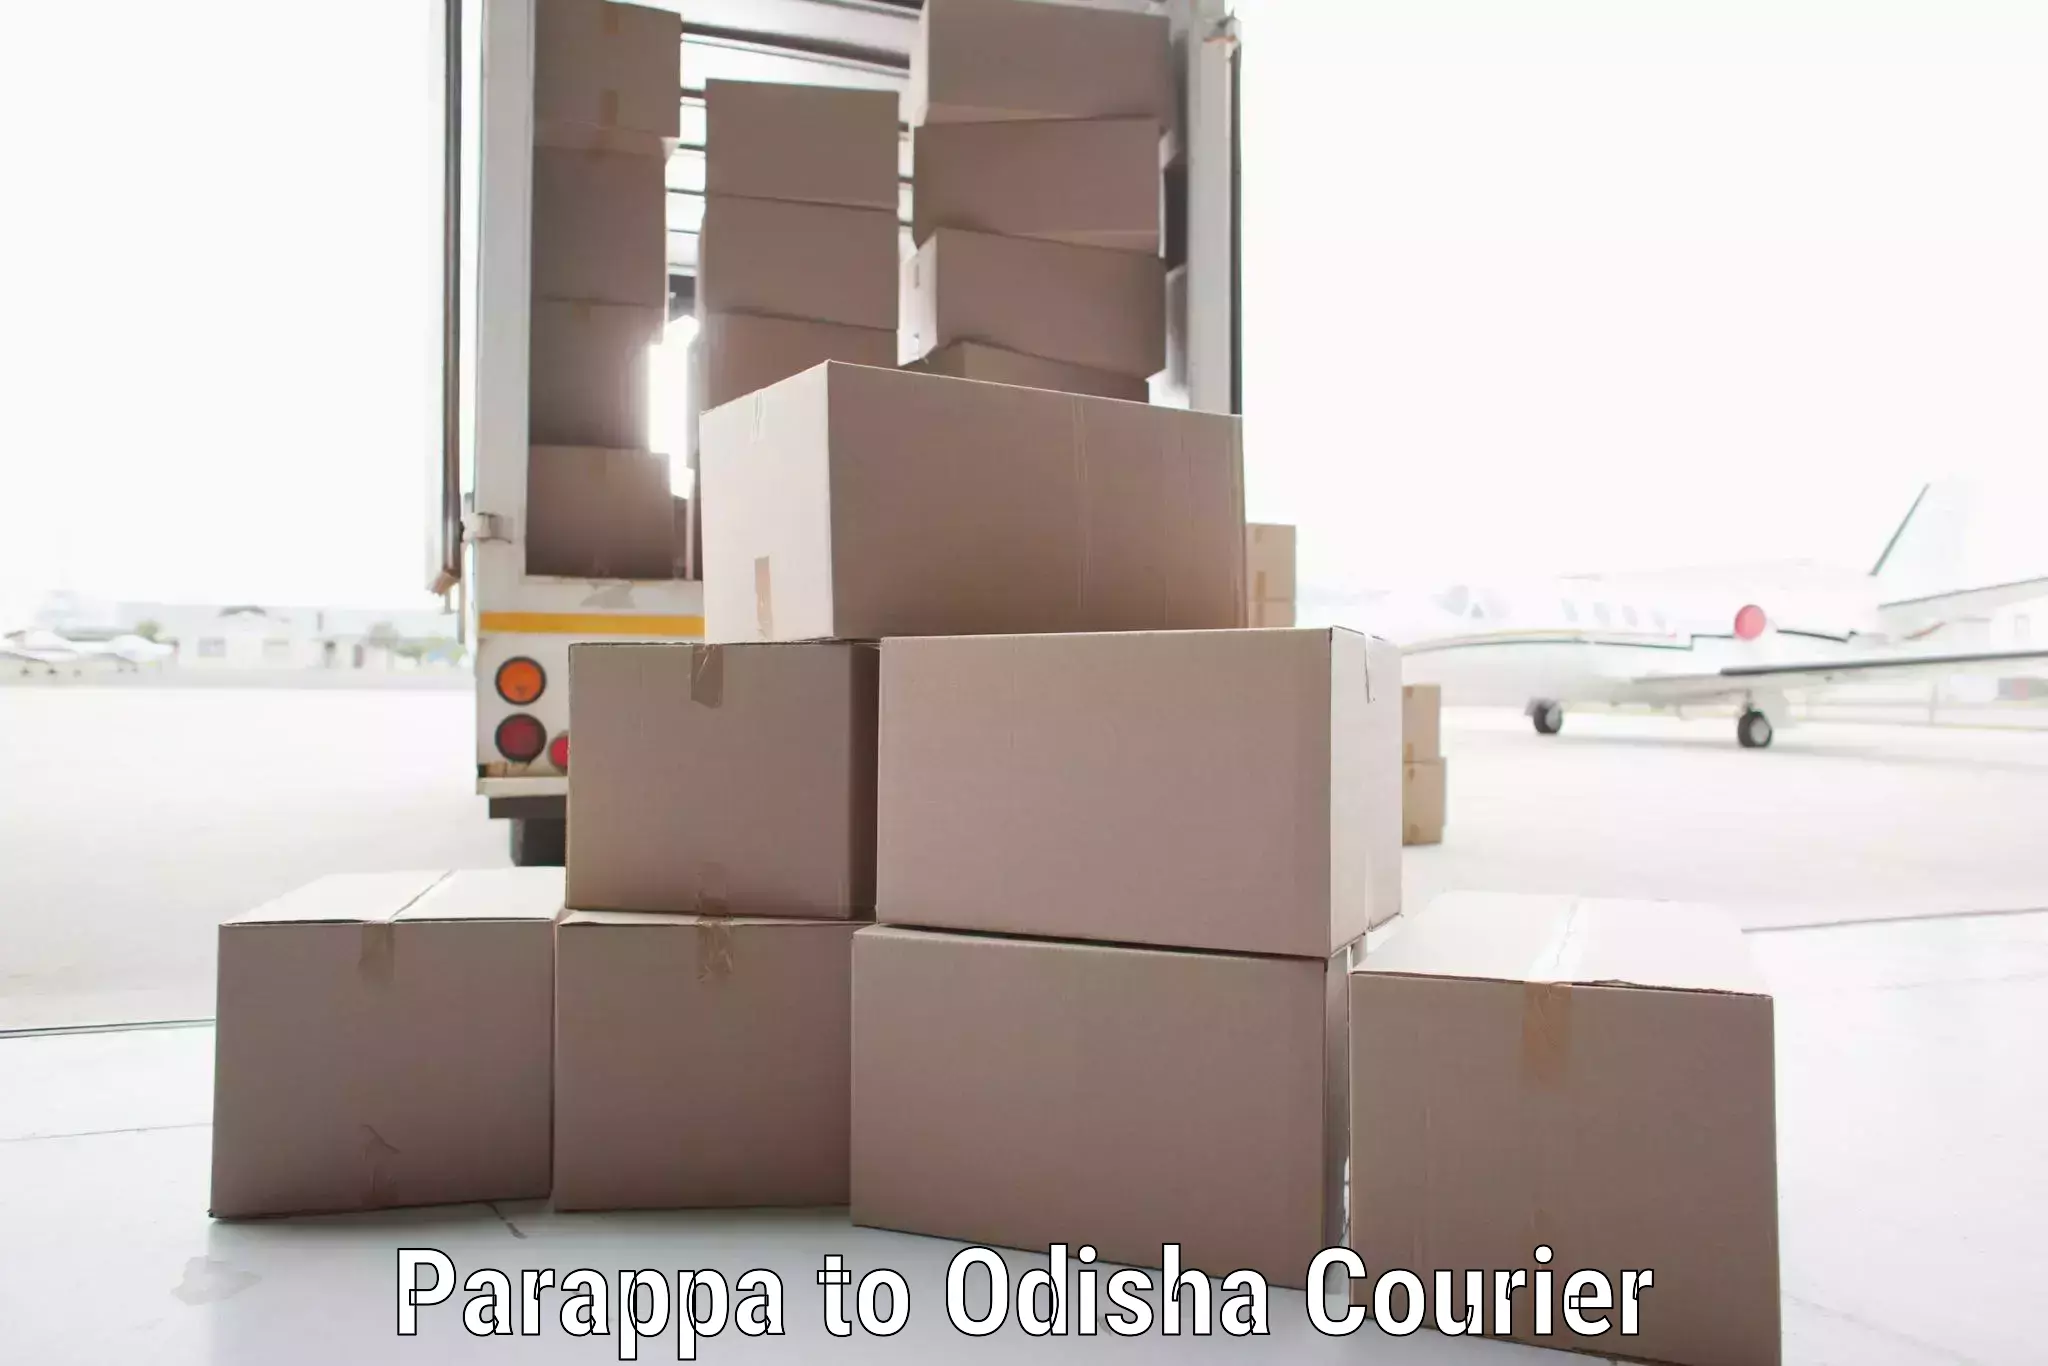 Nationwide courier service Parappa to Baleswar